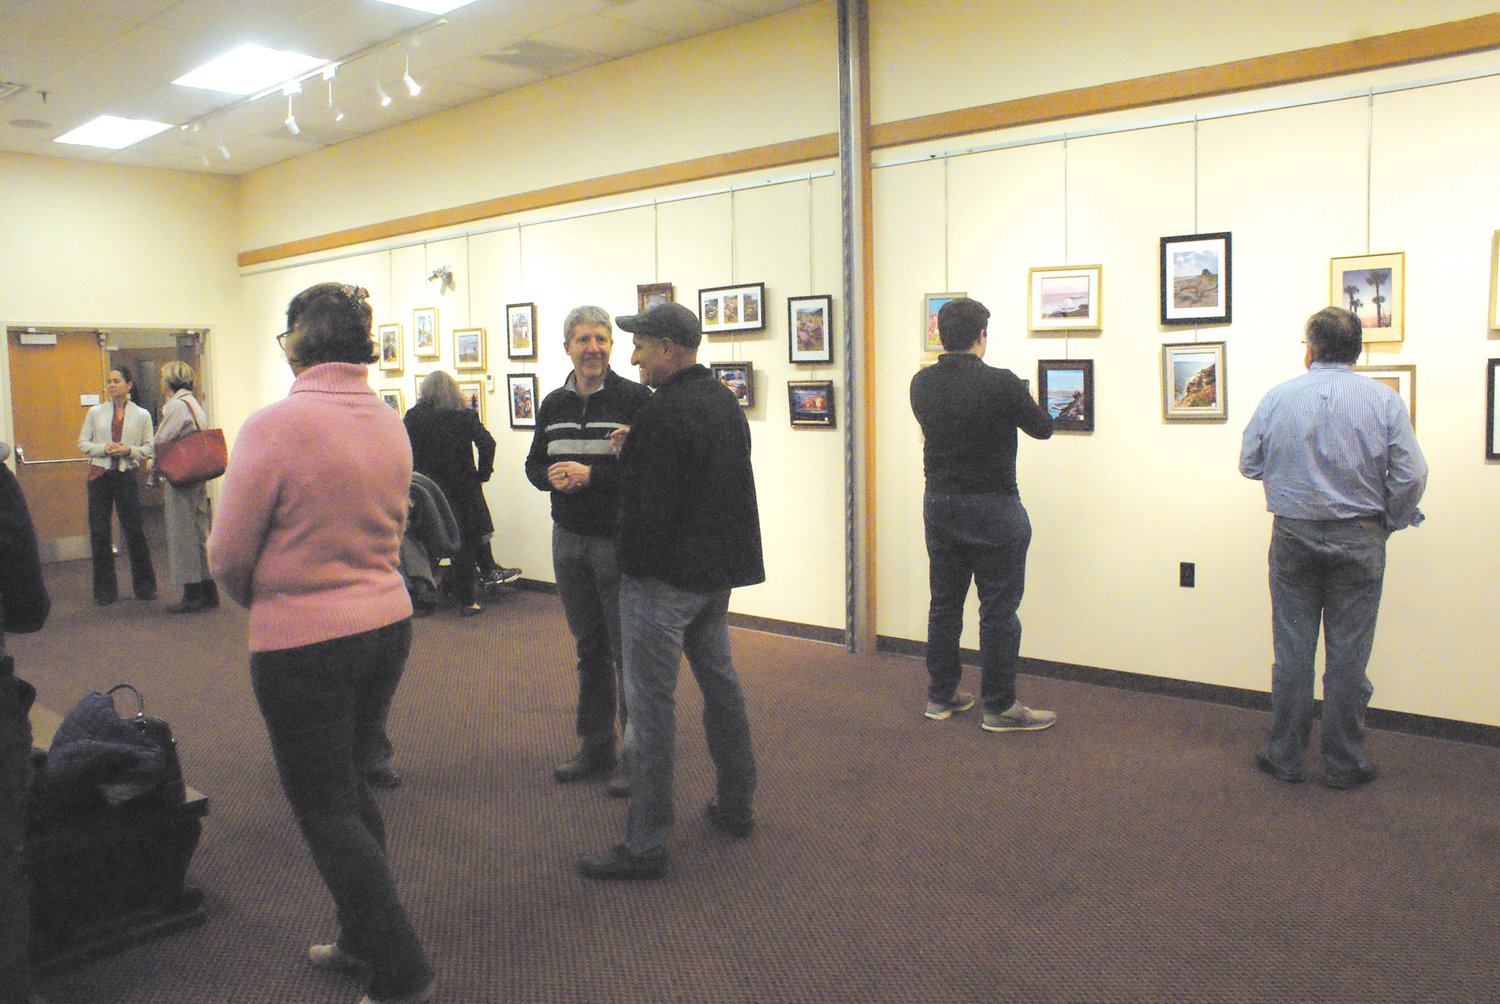 SHOWING HIS WORK: Terry Boylan (left) with his son Terrence and daughter-in-law Jennifer attended the Nov. 16 reception; Boylan is seated in front of his photography.